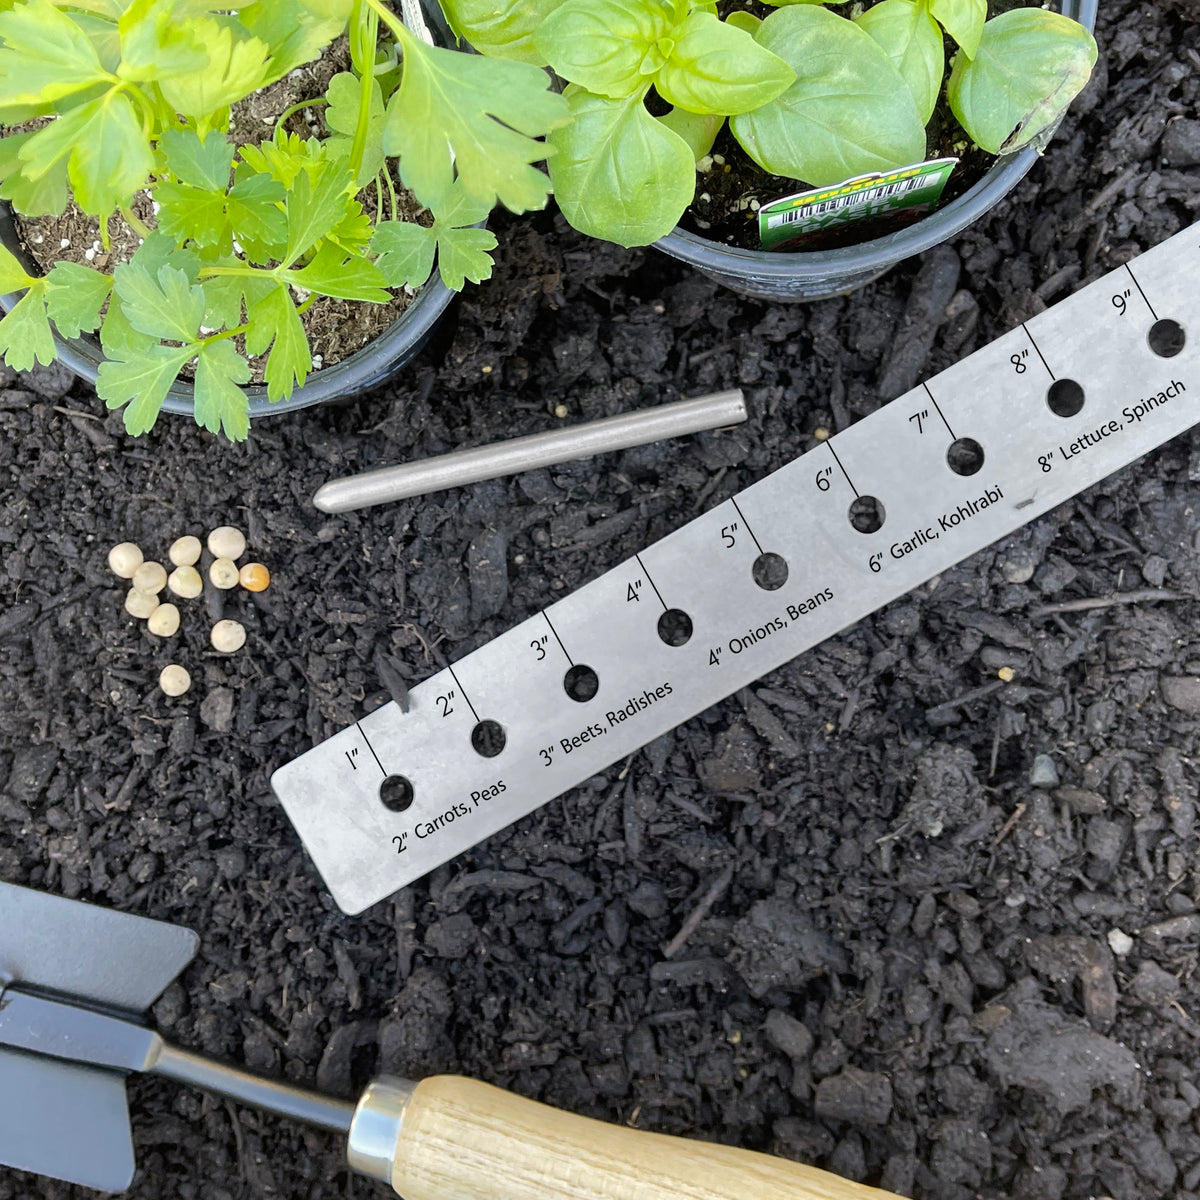 Intervale Seed and Plant Spacing Ruler, Gardener's Supply